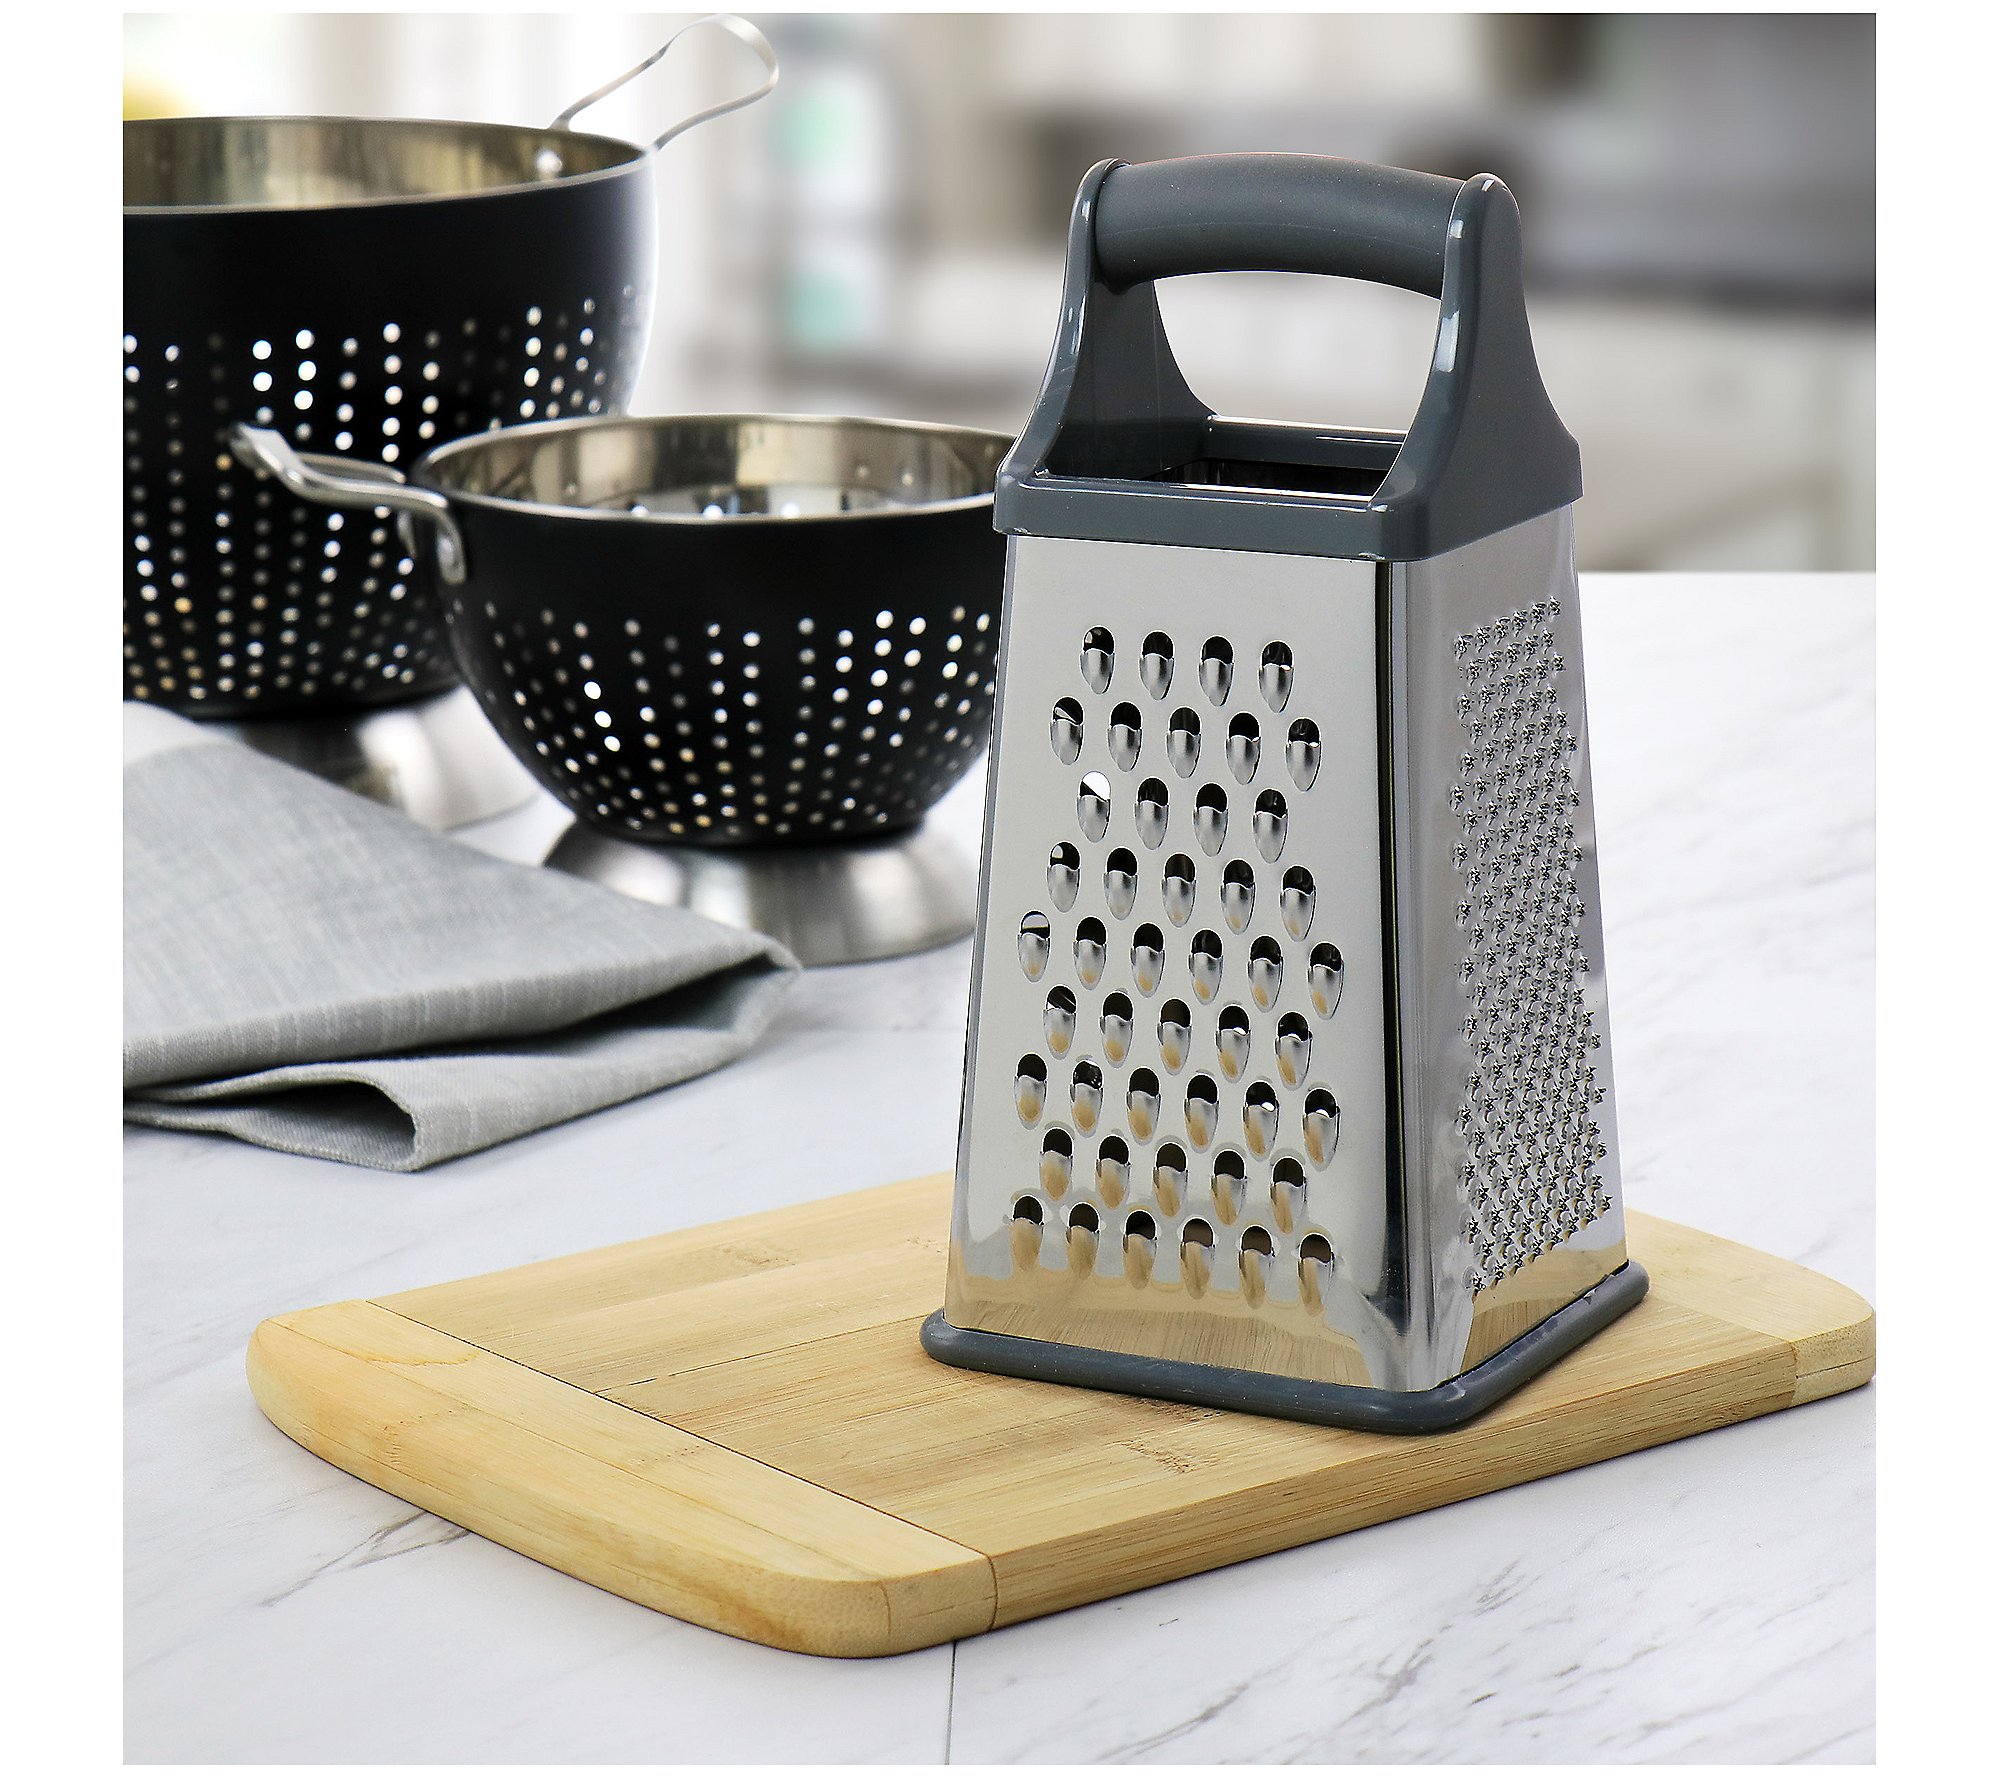 Oster Stainless Steel Four-Sided Box Grater